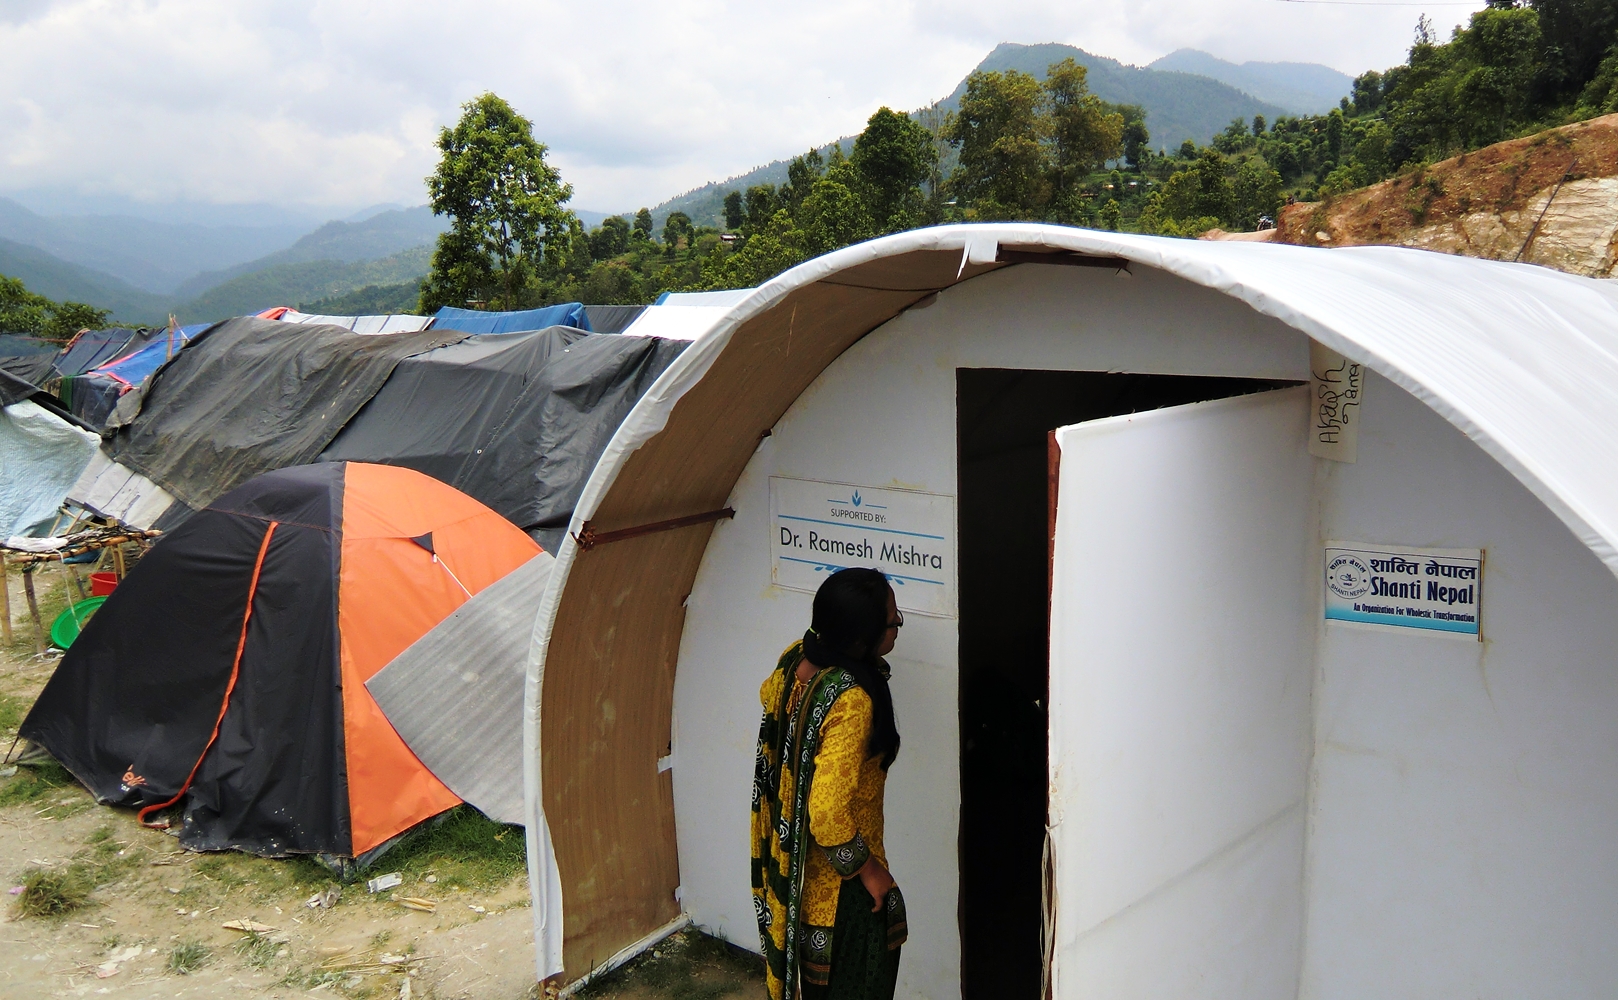 Besides setting up litter bins all over the Dhading camps, our local partner Shanti Nepal swiftly setup free clinic for victims to seek medical attention.